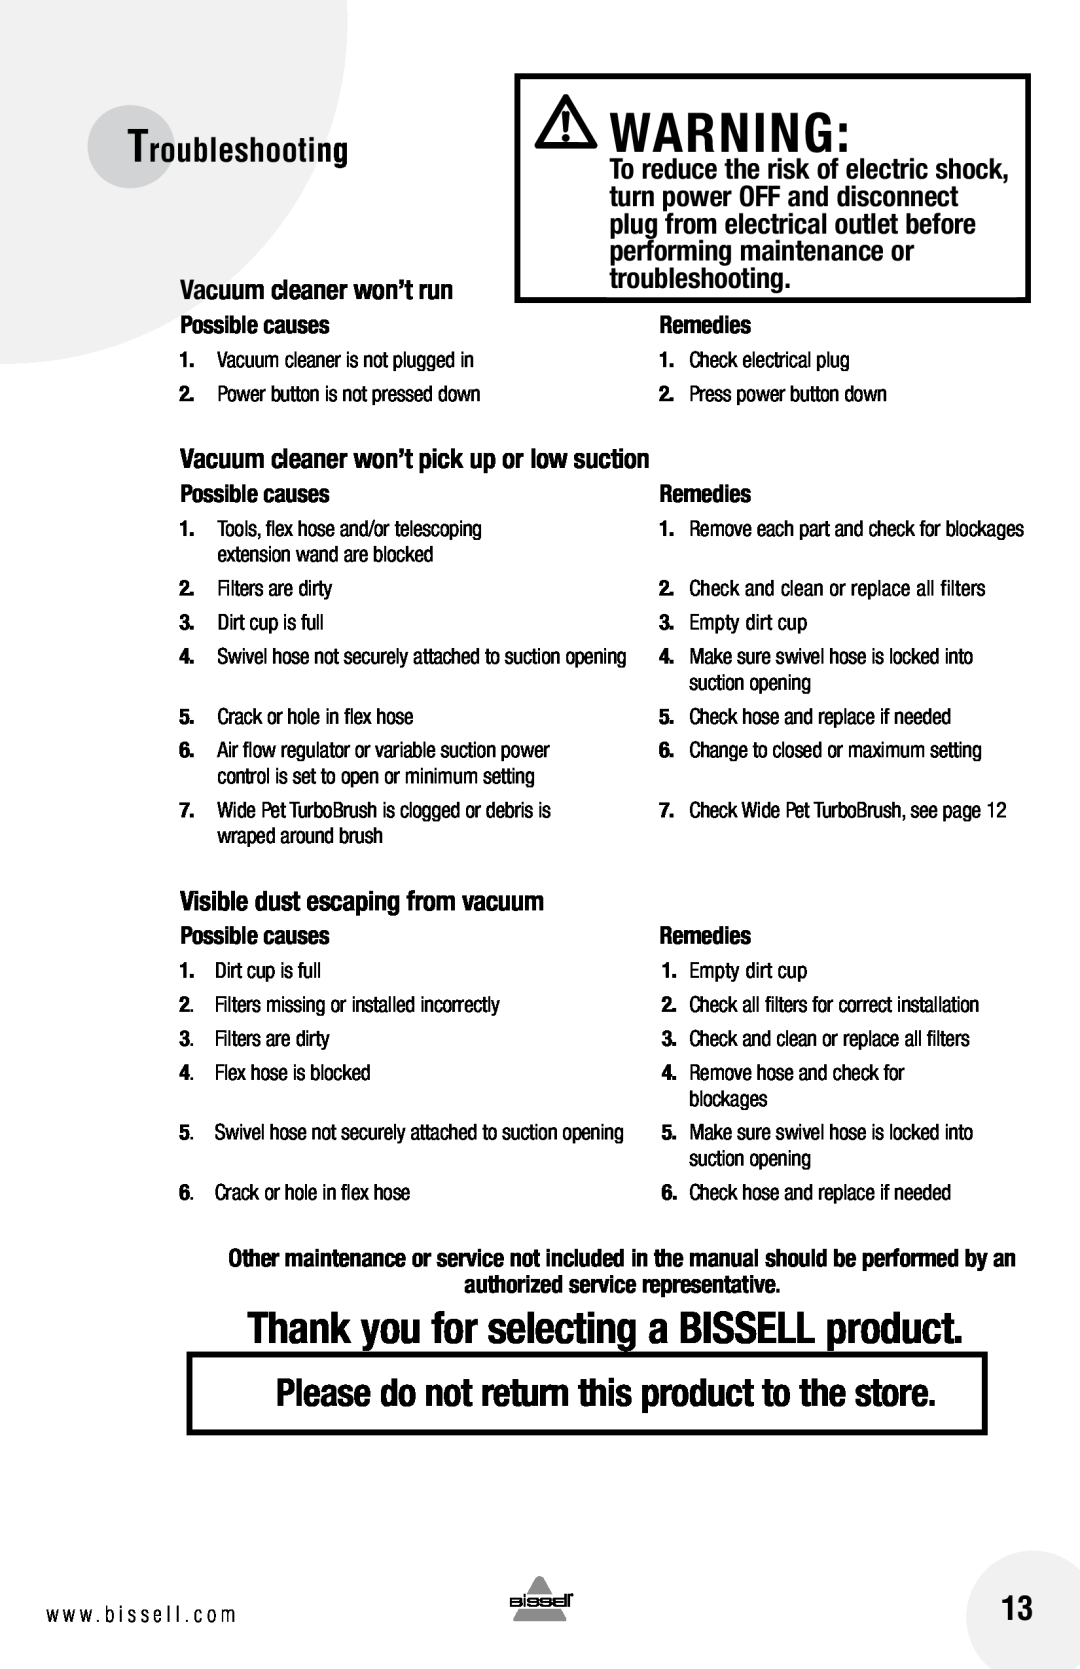 Bissell 33N7 Thank you for selecting a BISSELL product, Troubleshooting, Please do not return this product to the store 